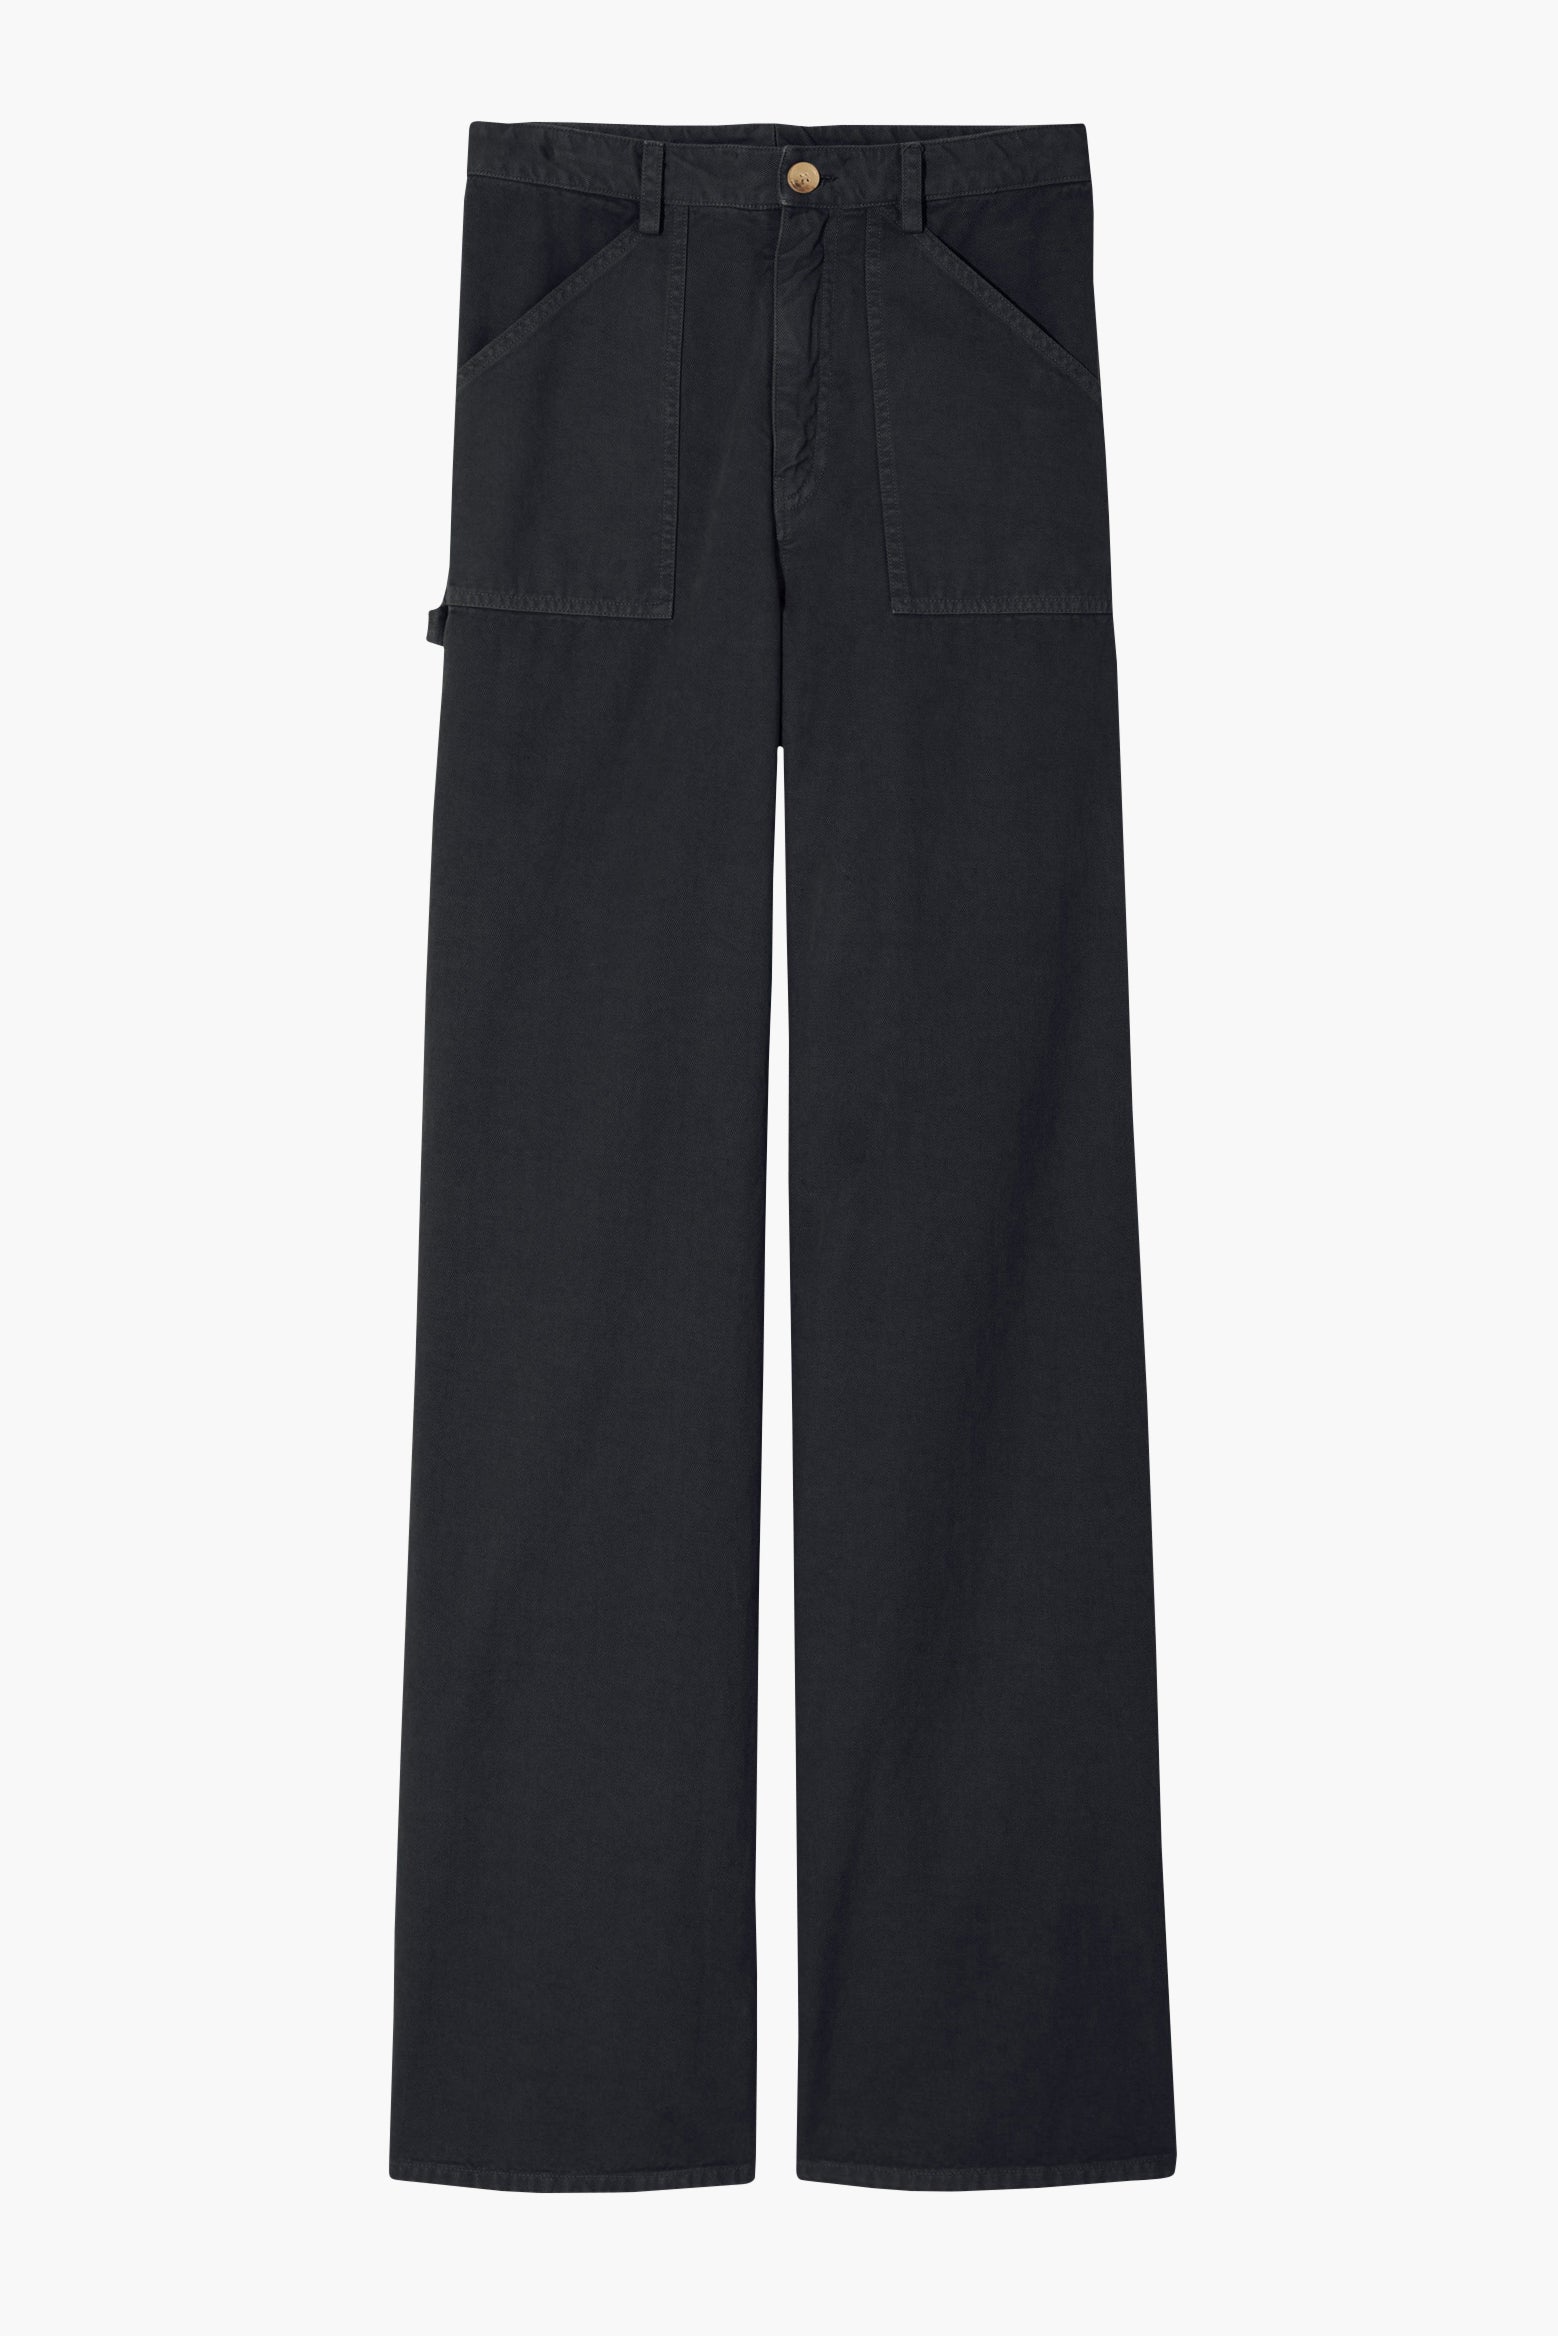 Nili Lotan Quentin Pant in Carbon available at TNT The New Trend Australia.